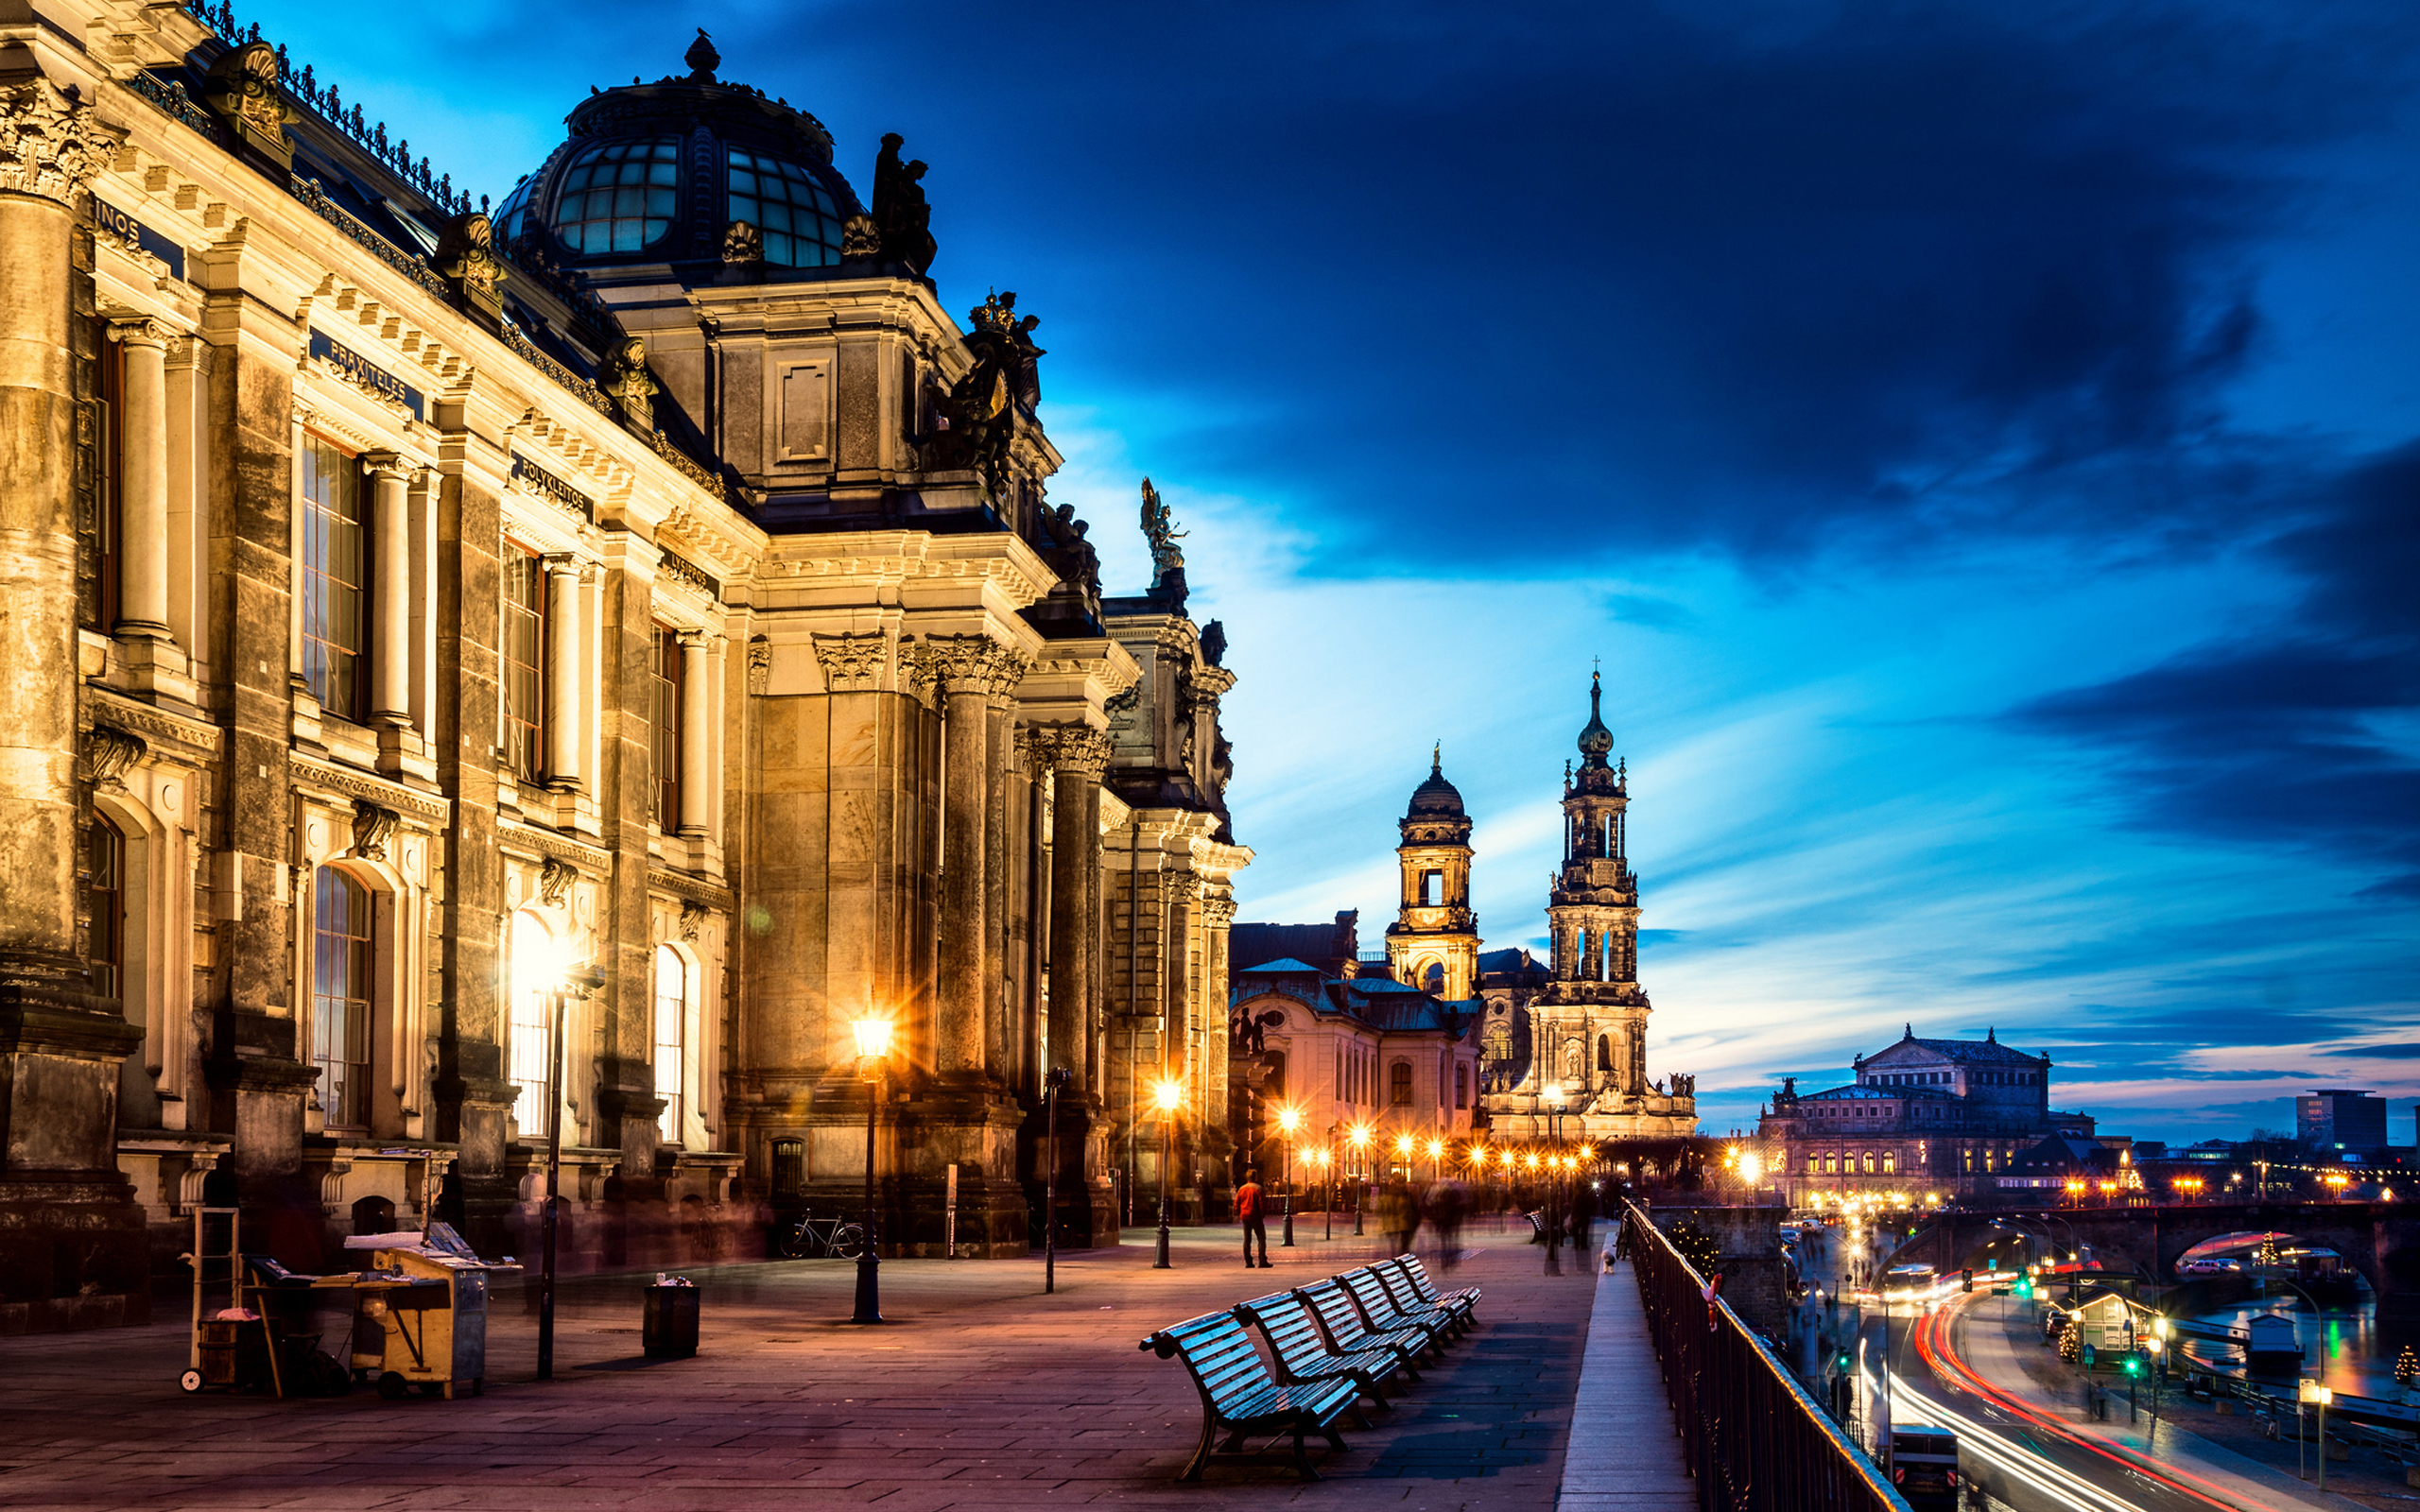 dresden, architecture, man made, city, germany, night, time lapse, cities